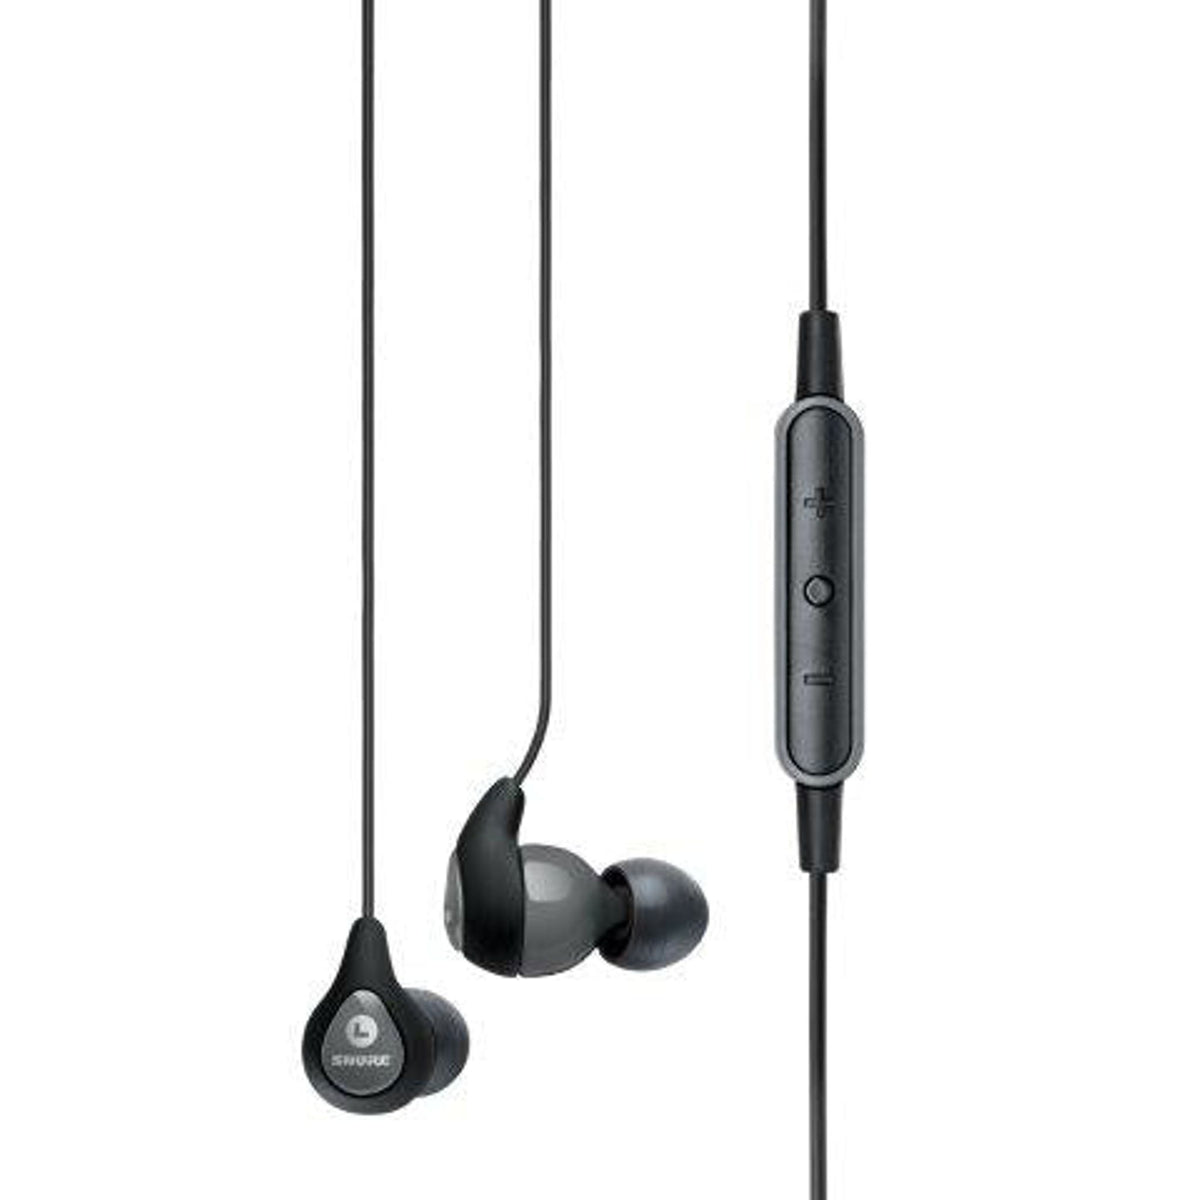 Stereo In-ear Grey Earphones Sound Isolating